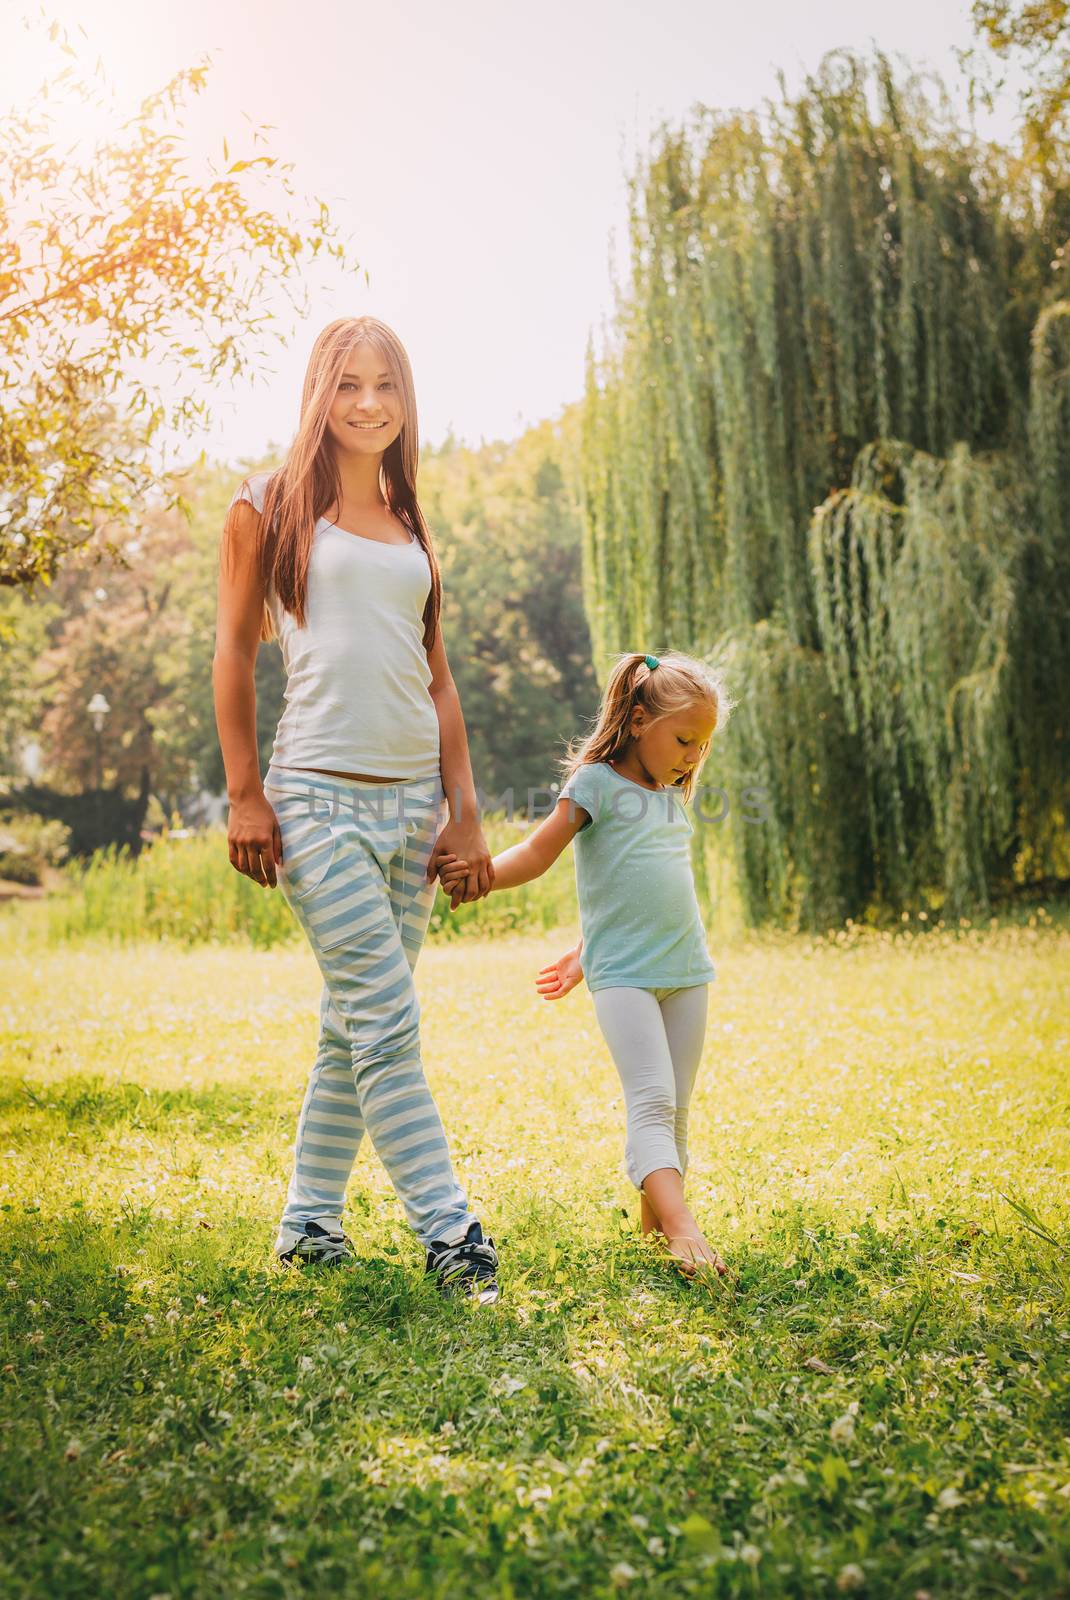 Beautiful mother and daughter walking through a park in spring day.